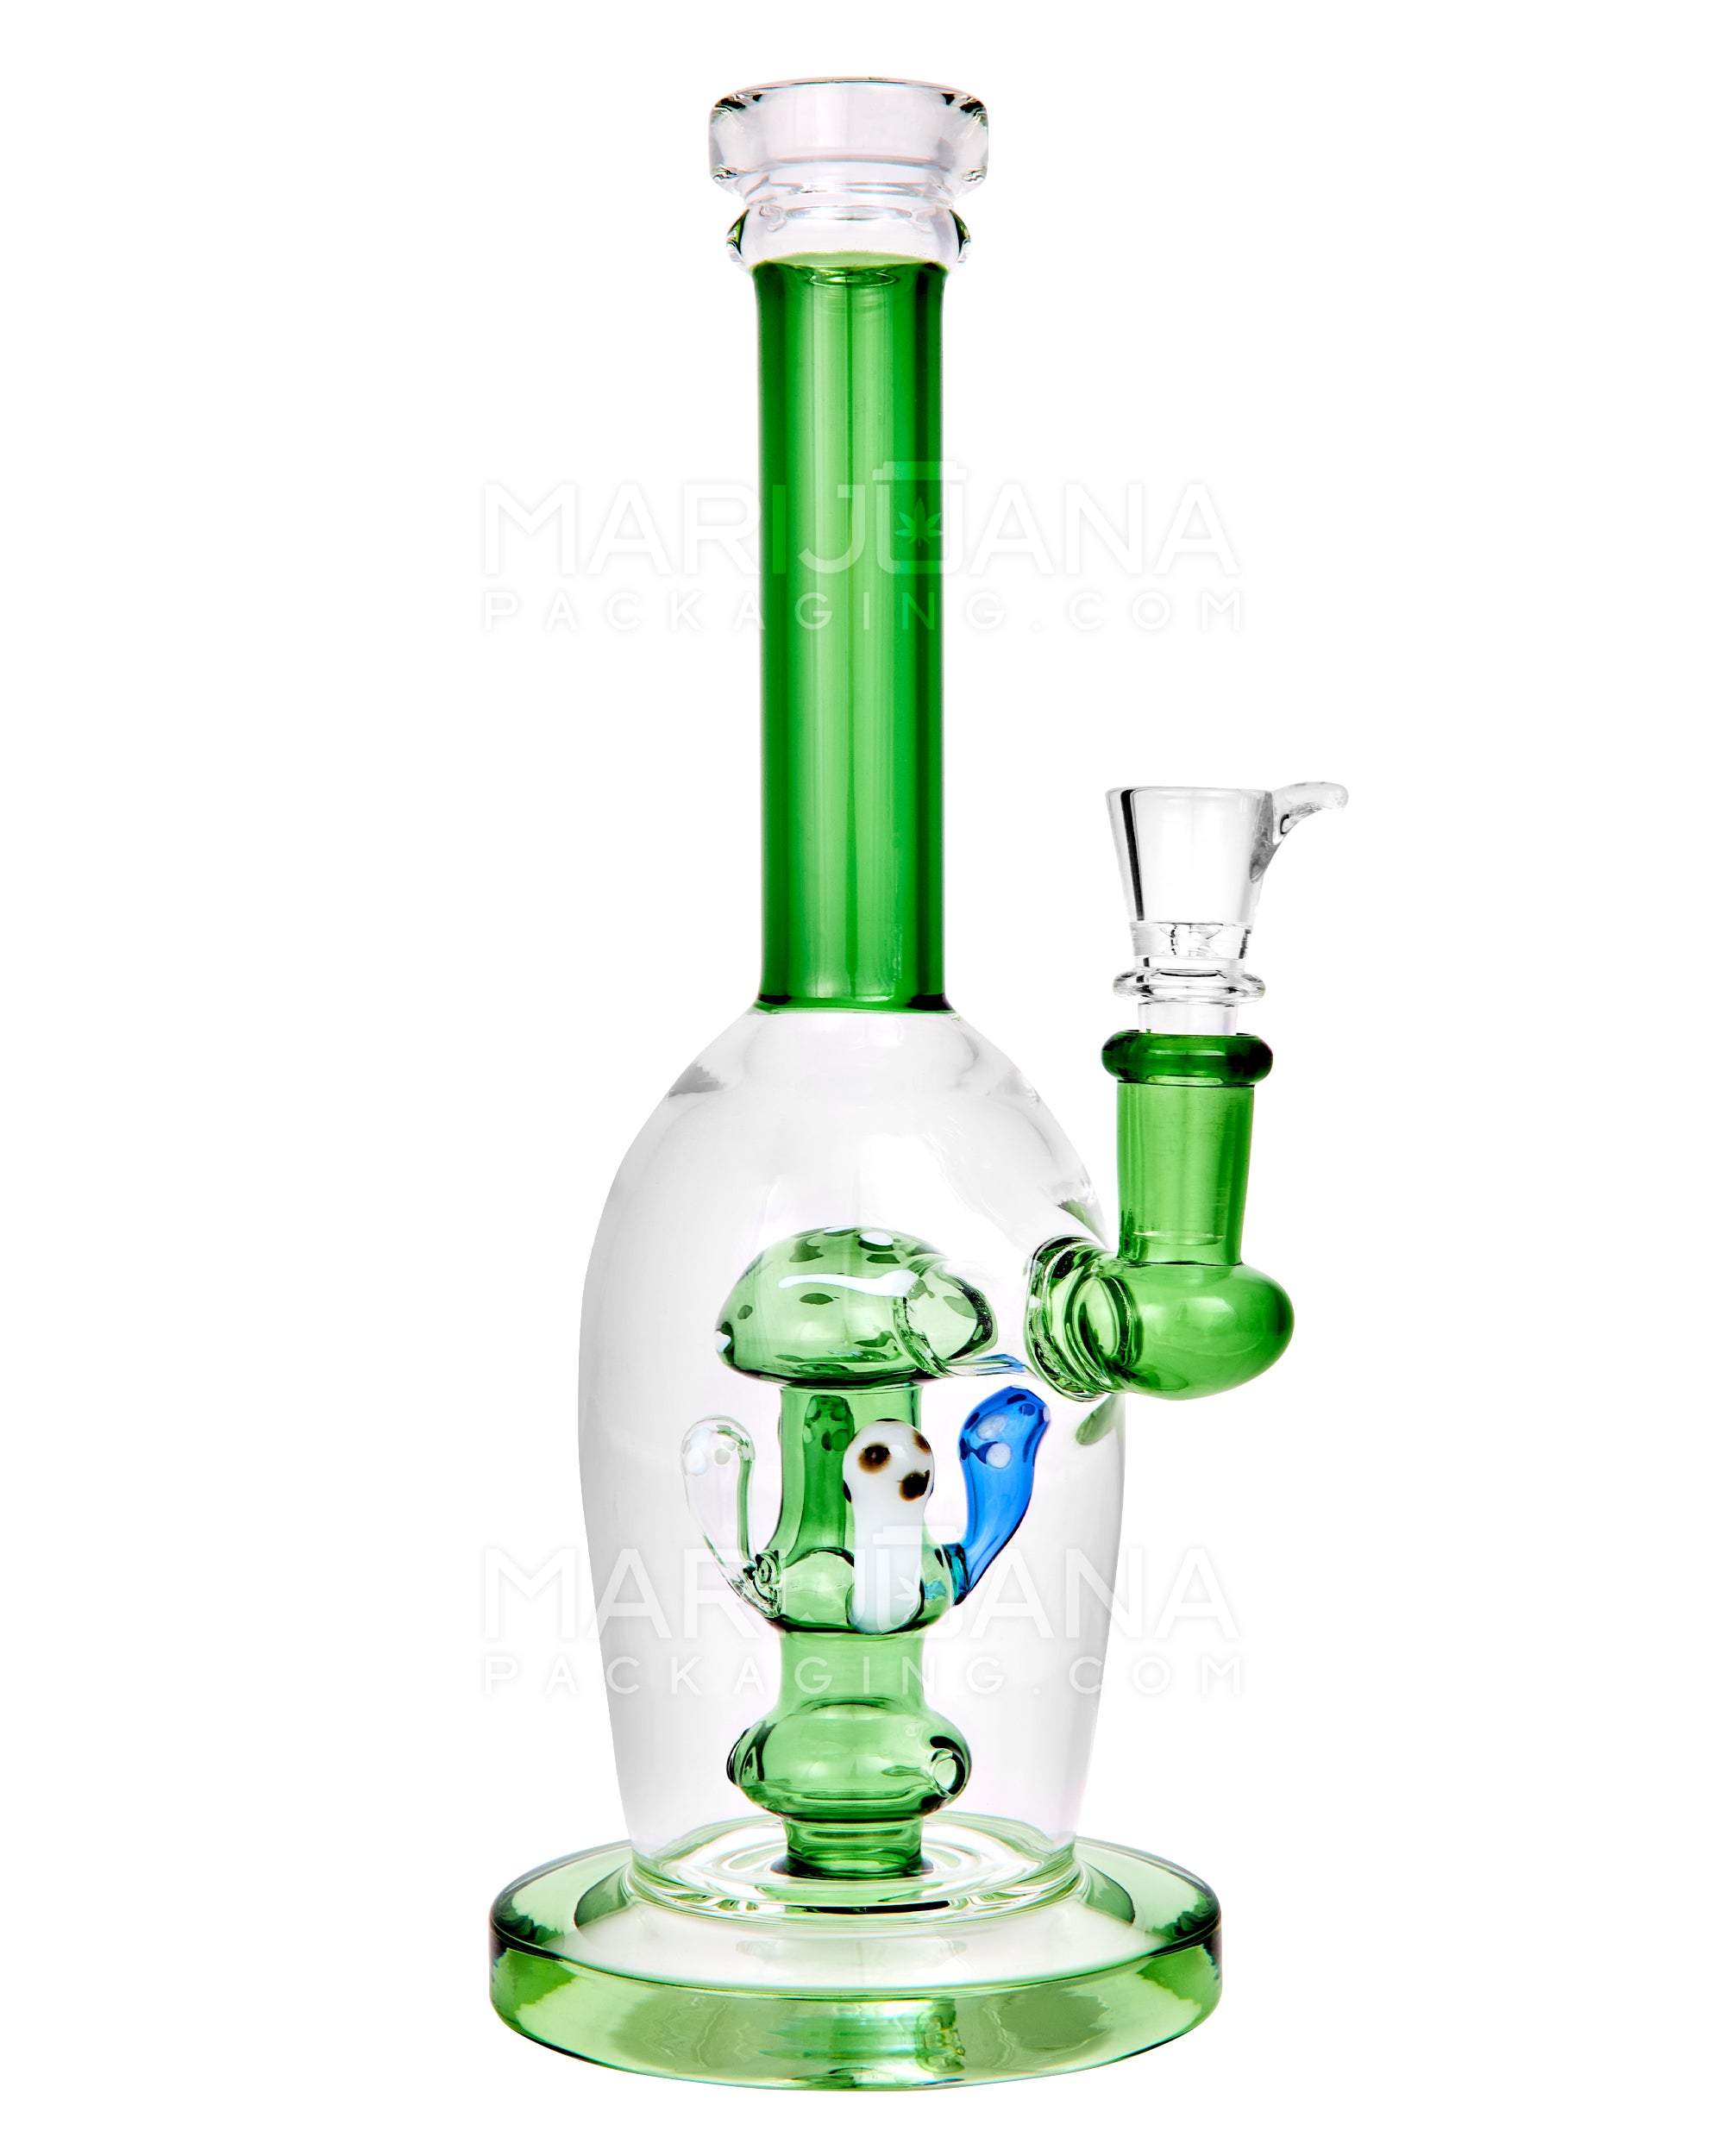 Straight Neck Mushroom Perc Glass Egg Water Pipe w/ Thick Base | 10.5in Tall - 14mm Bowl - Green - 1